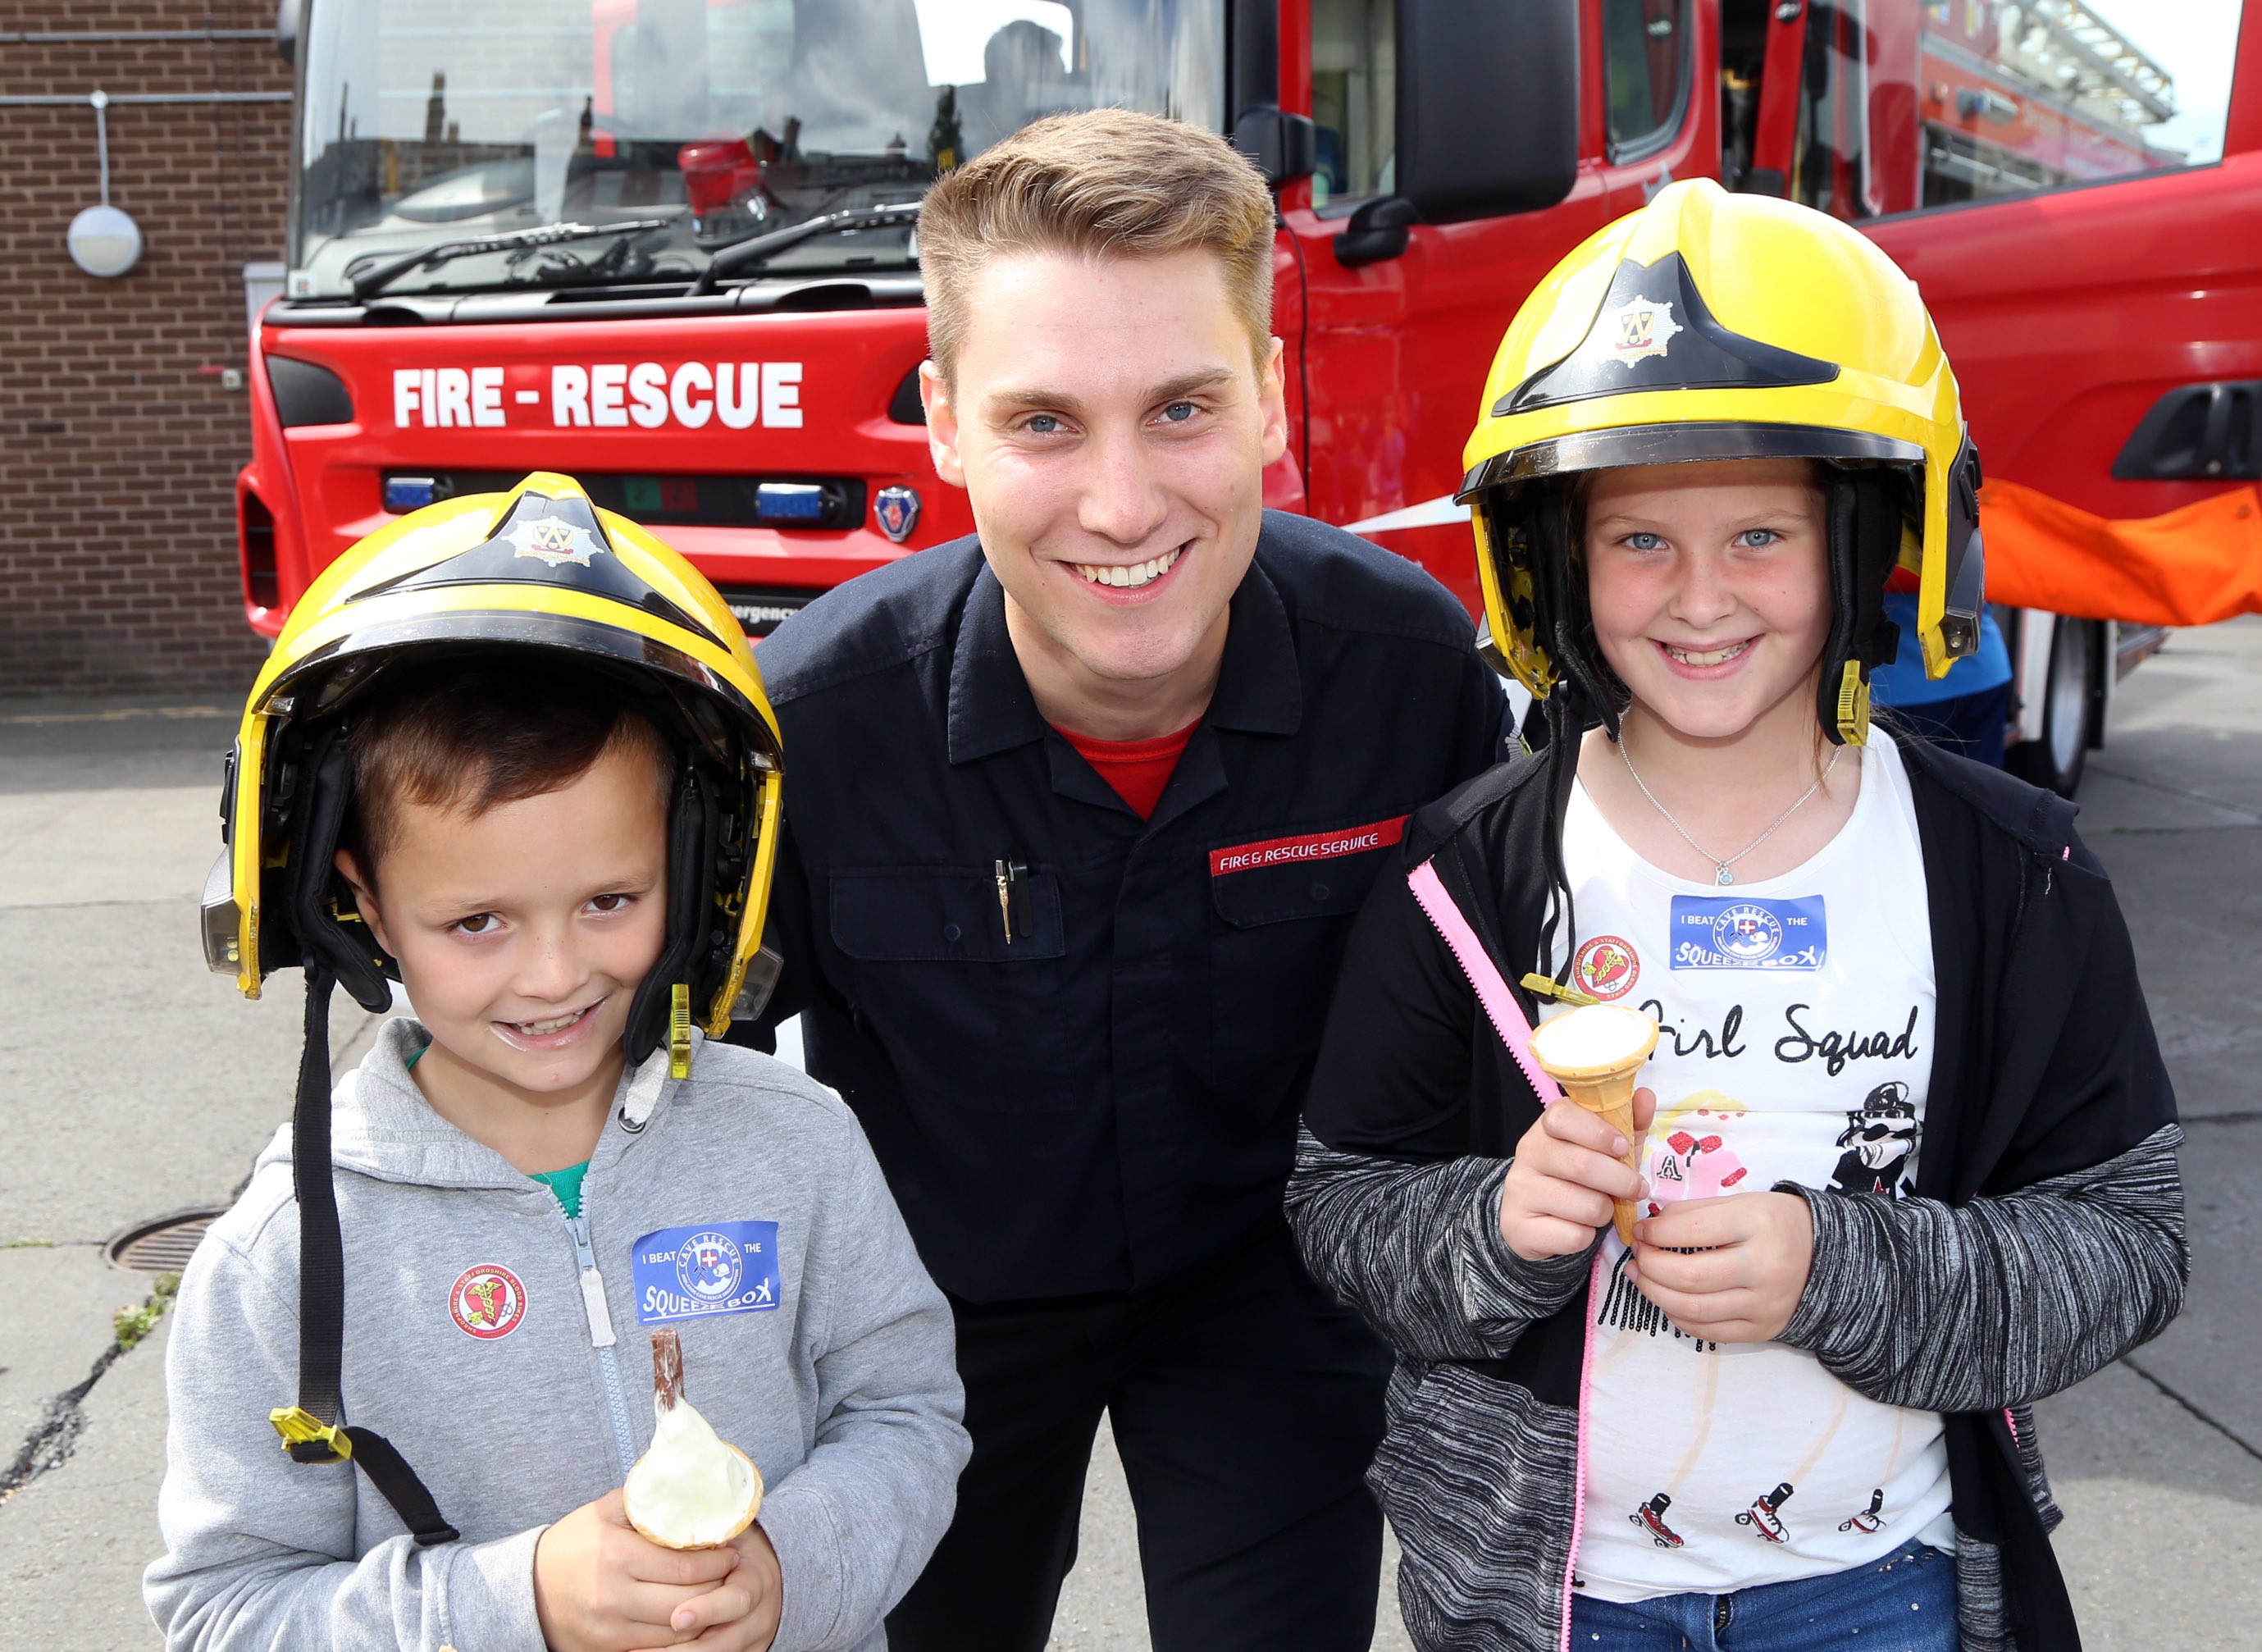 Wellington firefighter Louie Longhi with Freddie Treherne (9) and Lily Mae-Bailey (8), both from Shrewsbury.